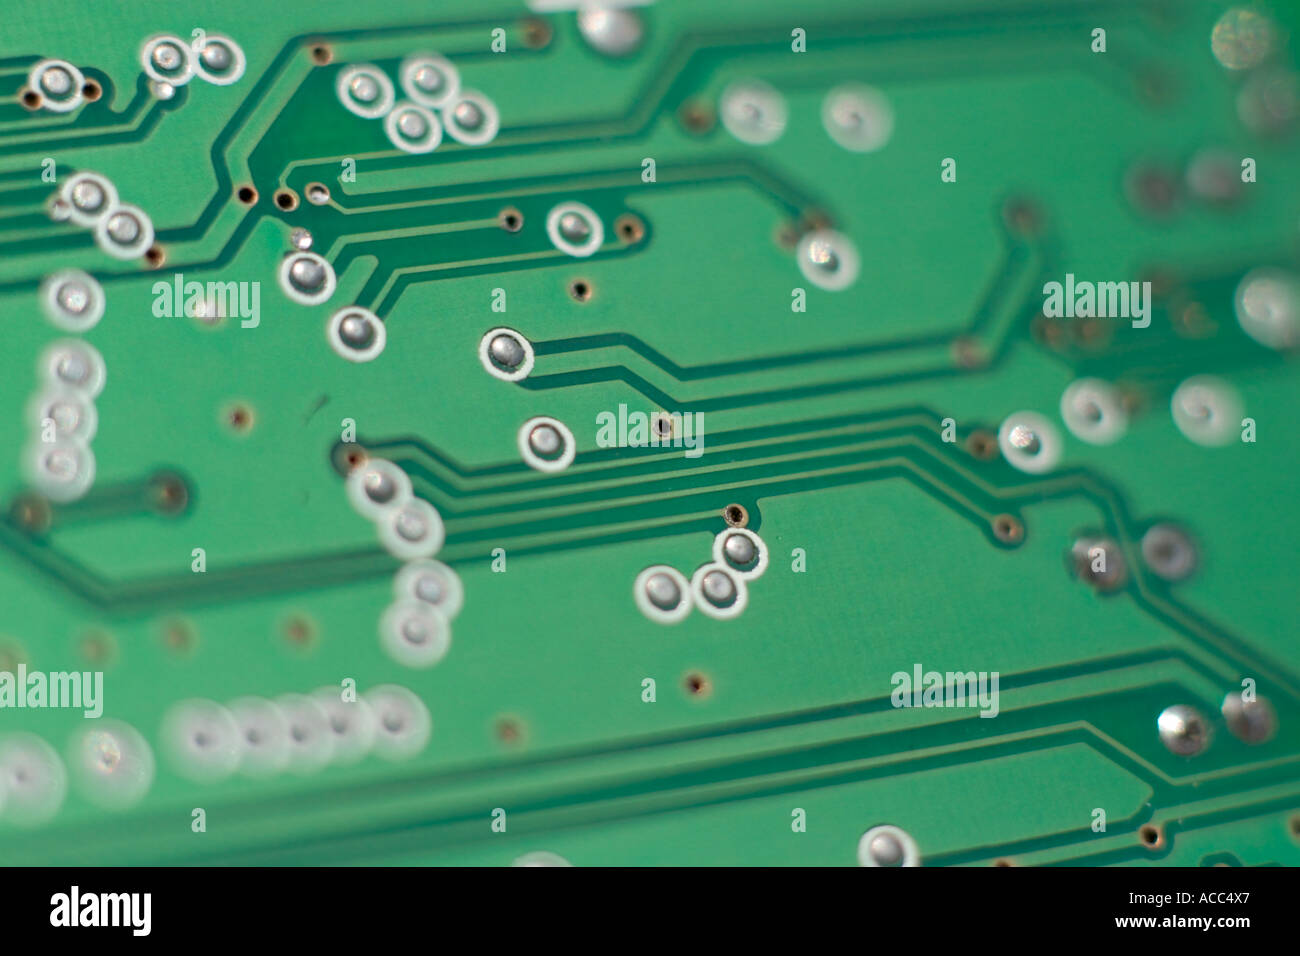 explosion In the mercy of write a letter printed circuit board pattern with many vias Stock Photo - Alamy